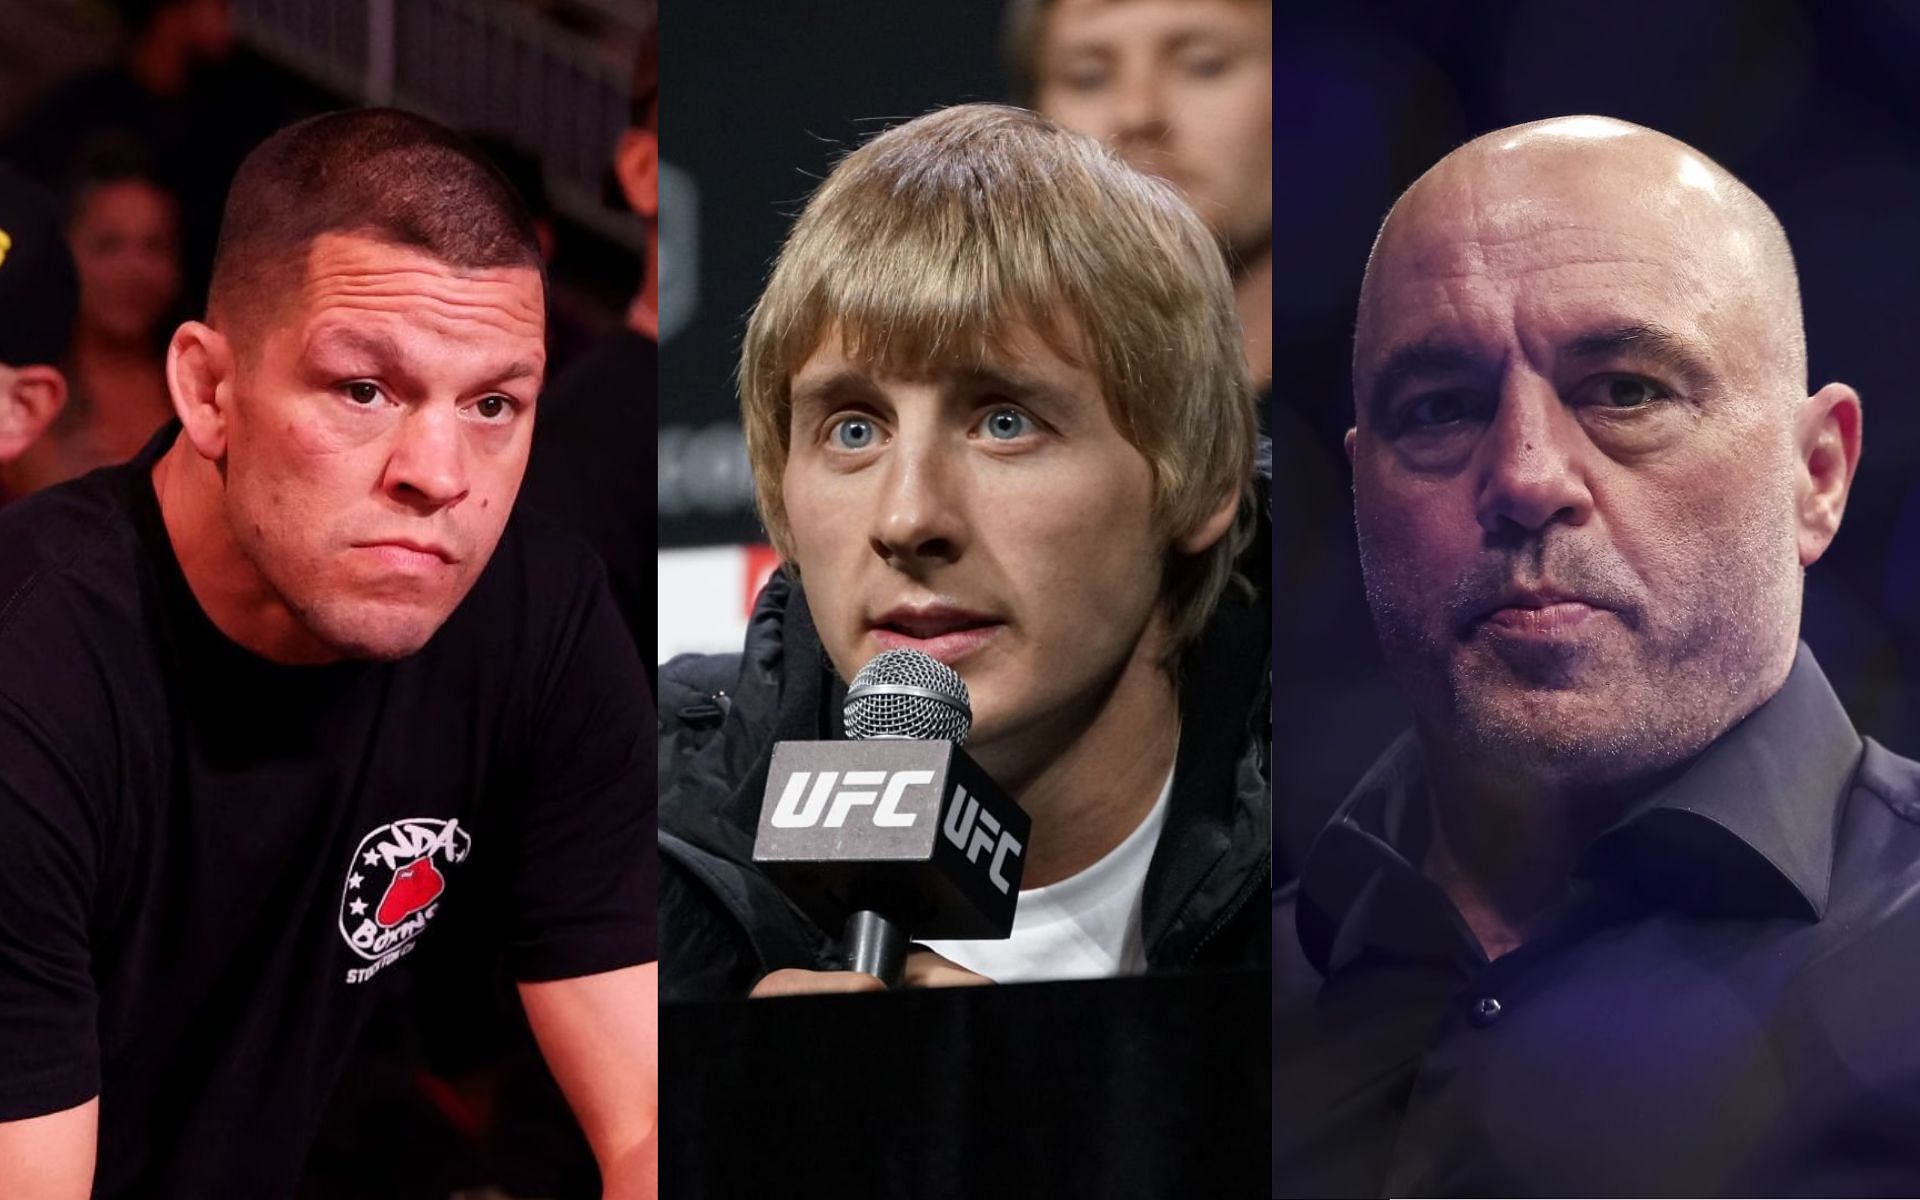 Paddy Pimblett reveals that criticism from Joe Rogan and Nate Diaz after his last win affected him